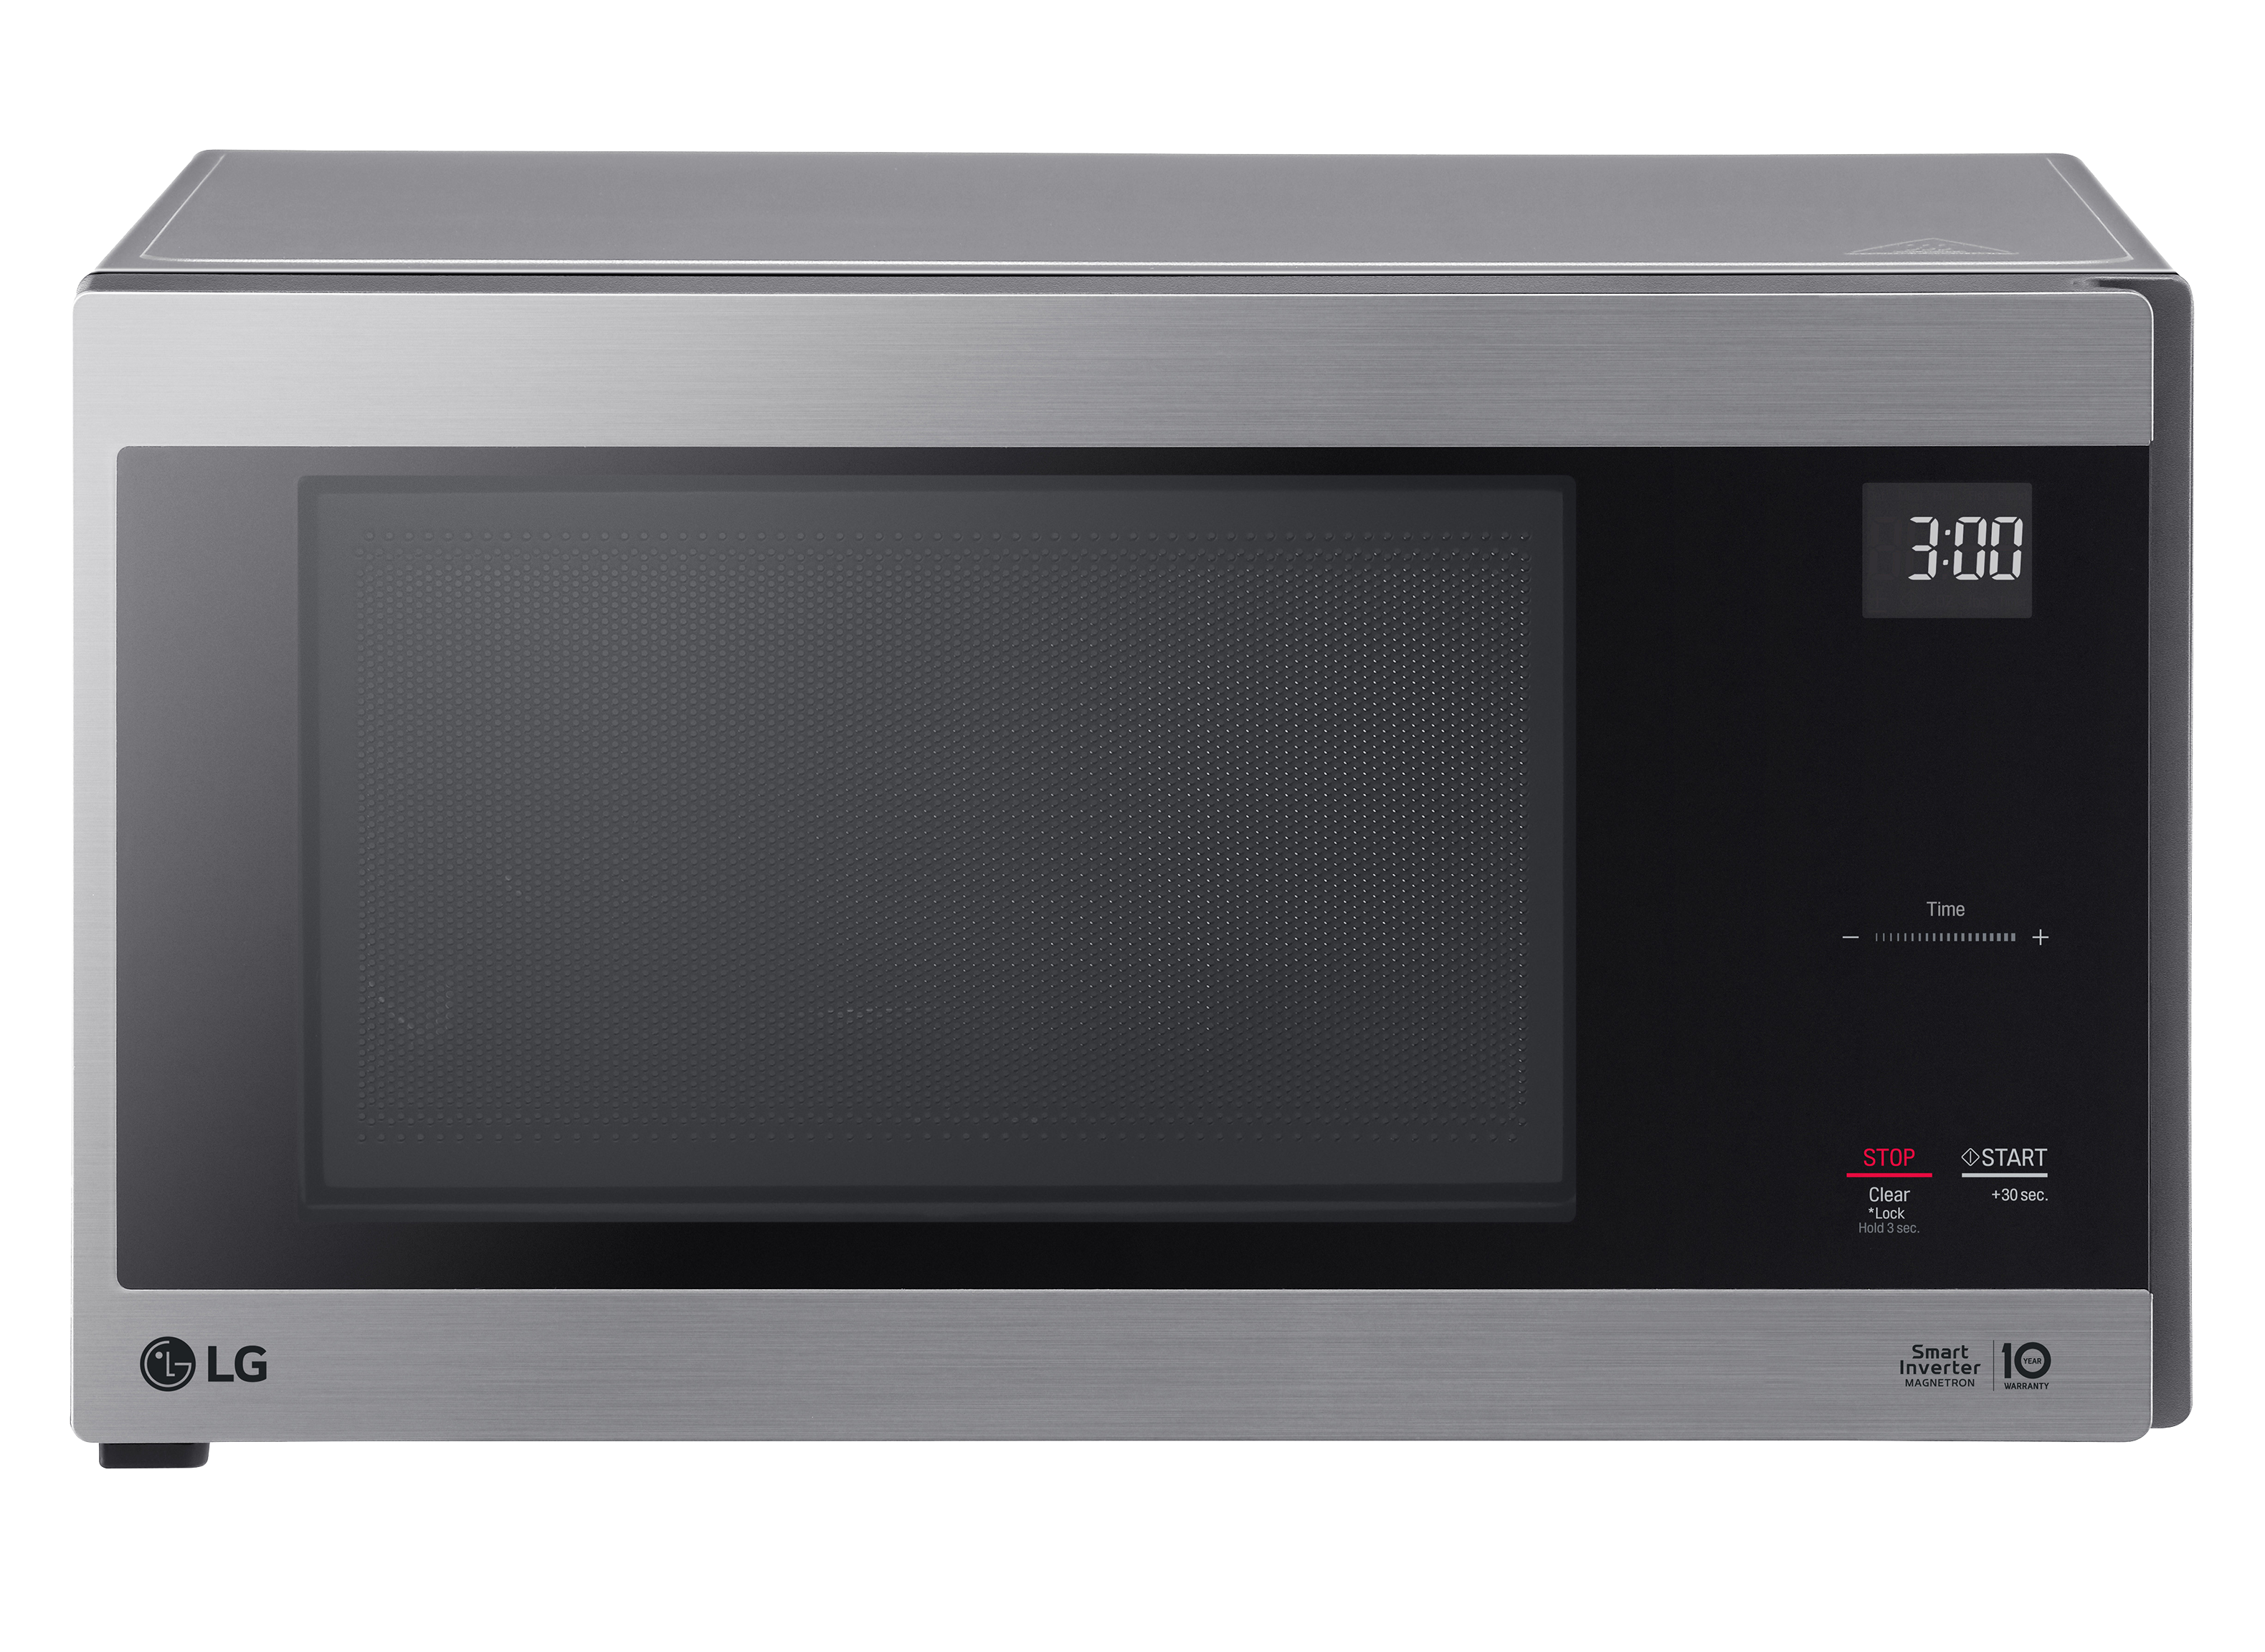 https://crdms.images.consumerreports.org/prod/products/cr/models/405087-large-countertop-microwaves-lg-mswn1590l-10024395.png